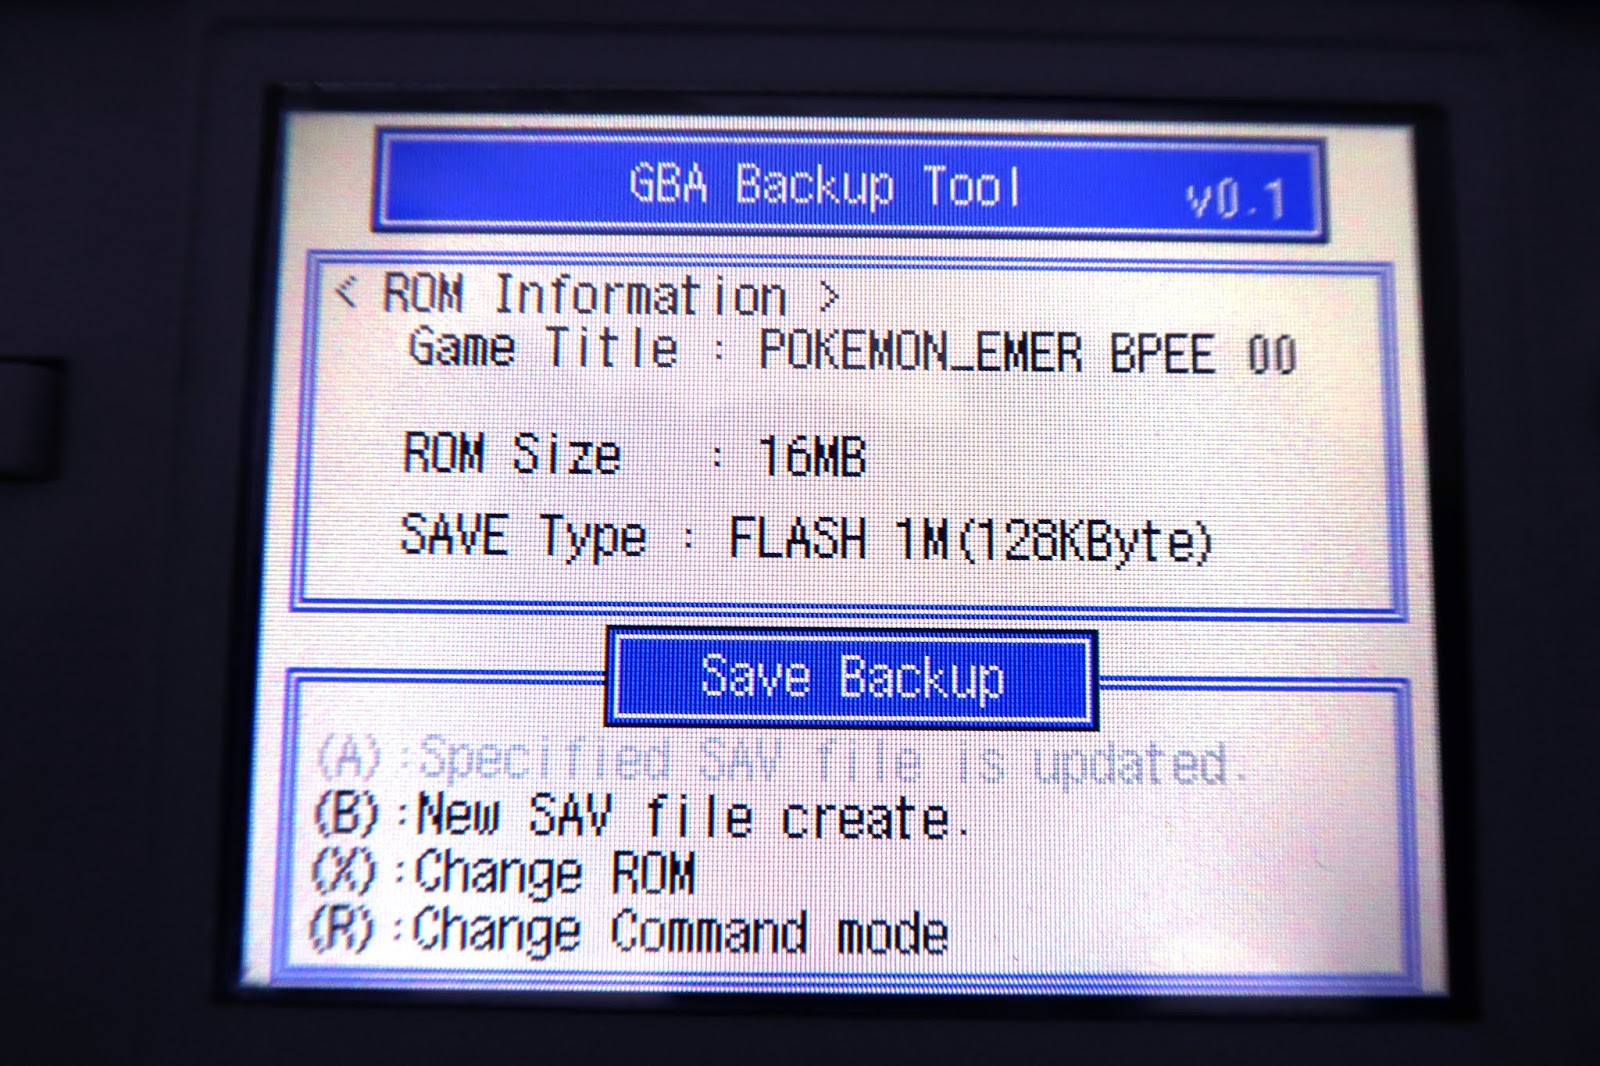 to get the Event Tickets in Pokémon Emerald - Gamer Mistake